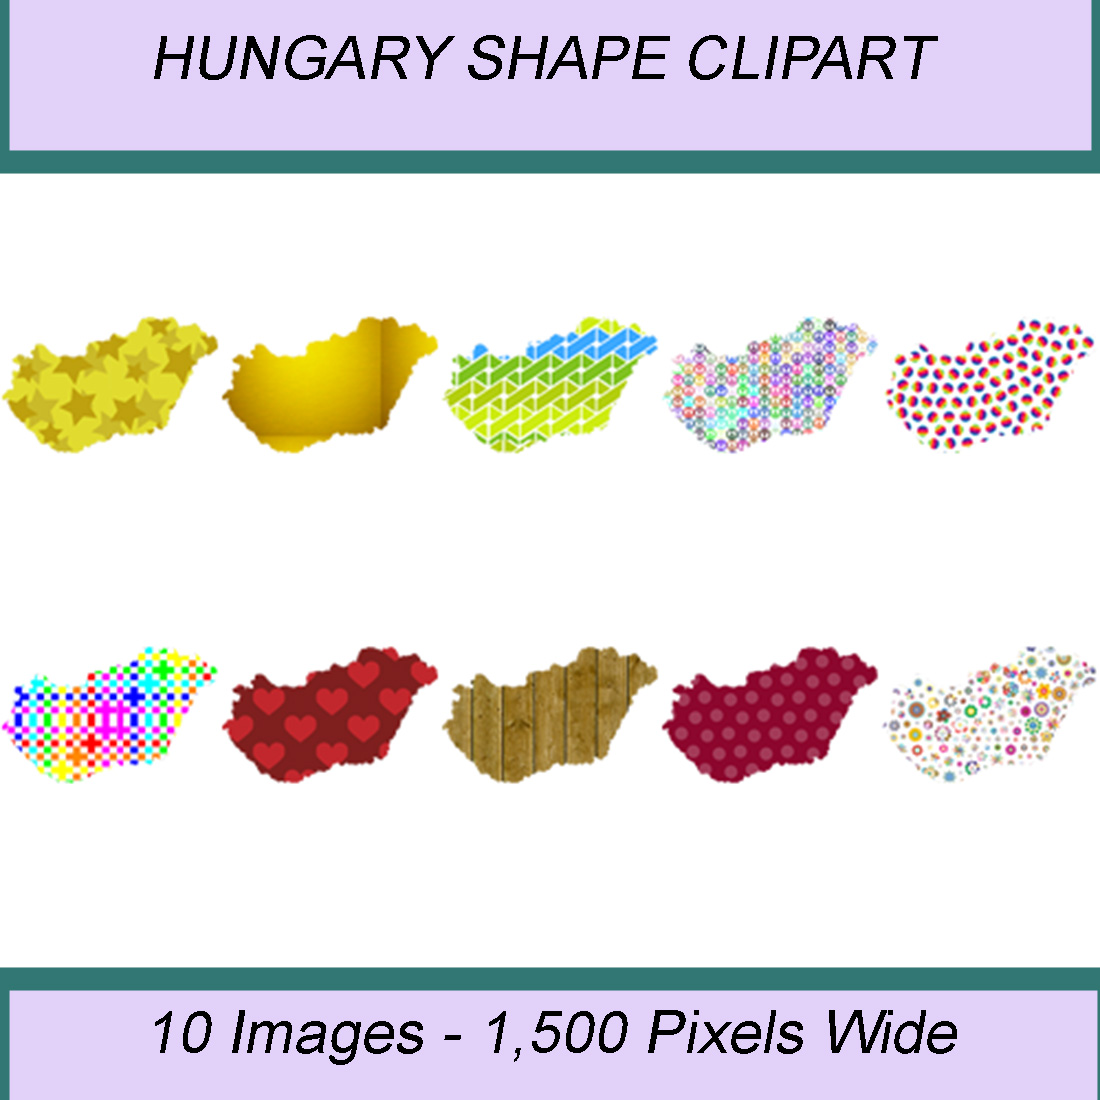 HUNGARY SHAPE CLIPART ICONS cover image.